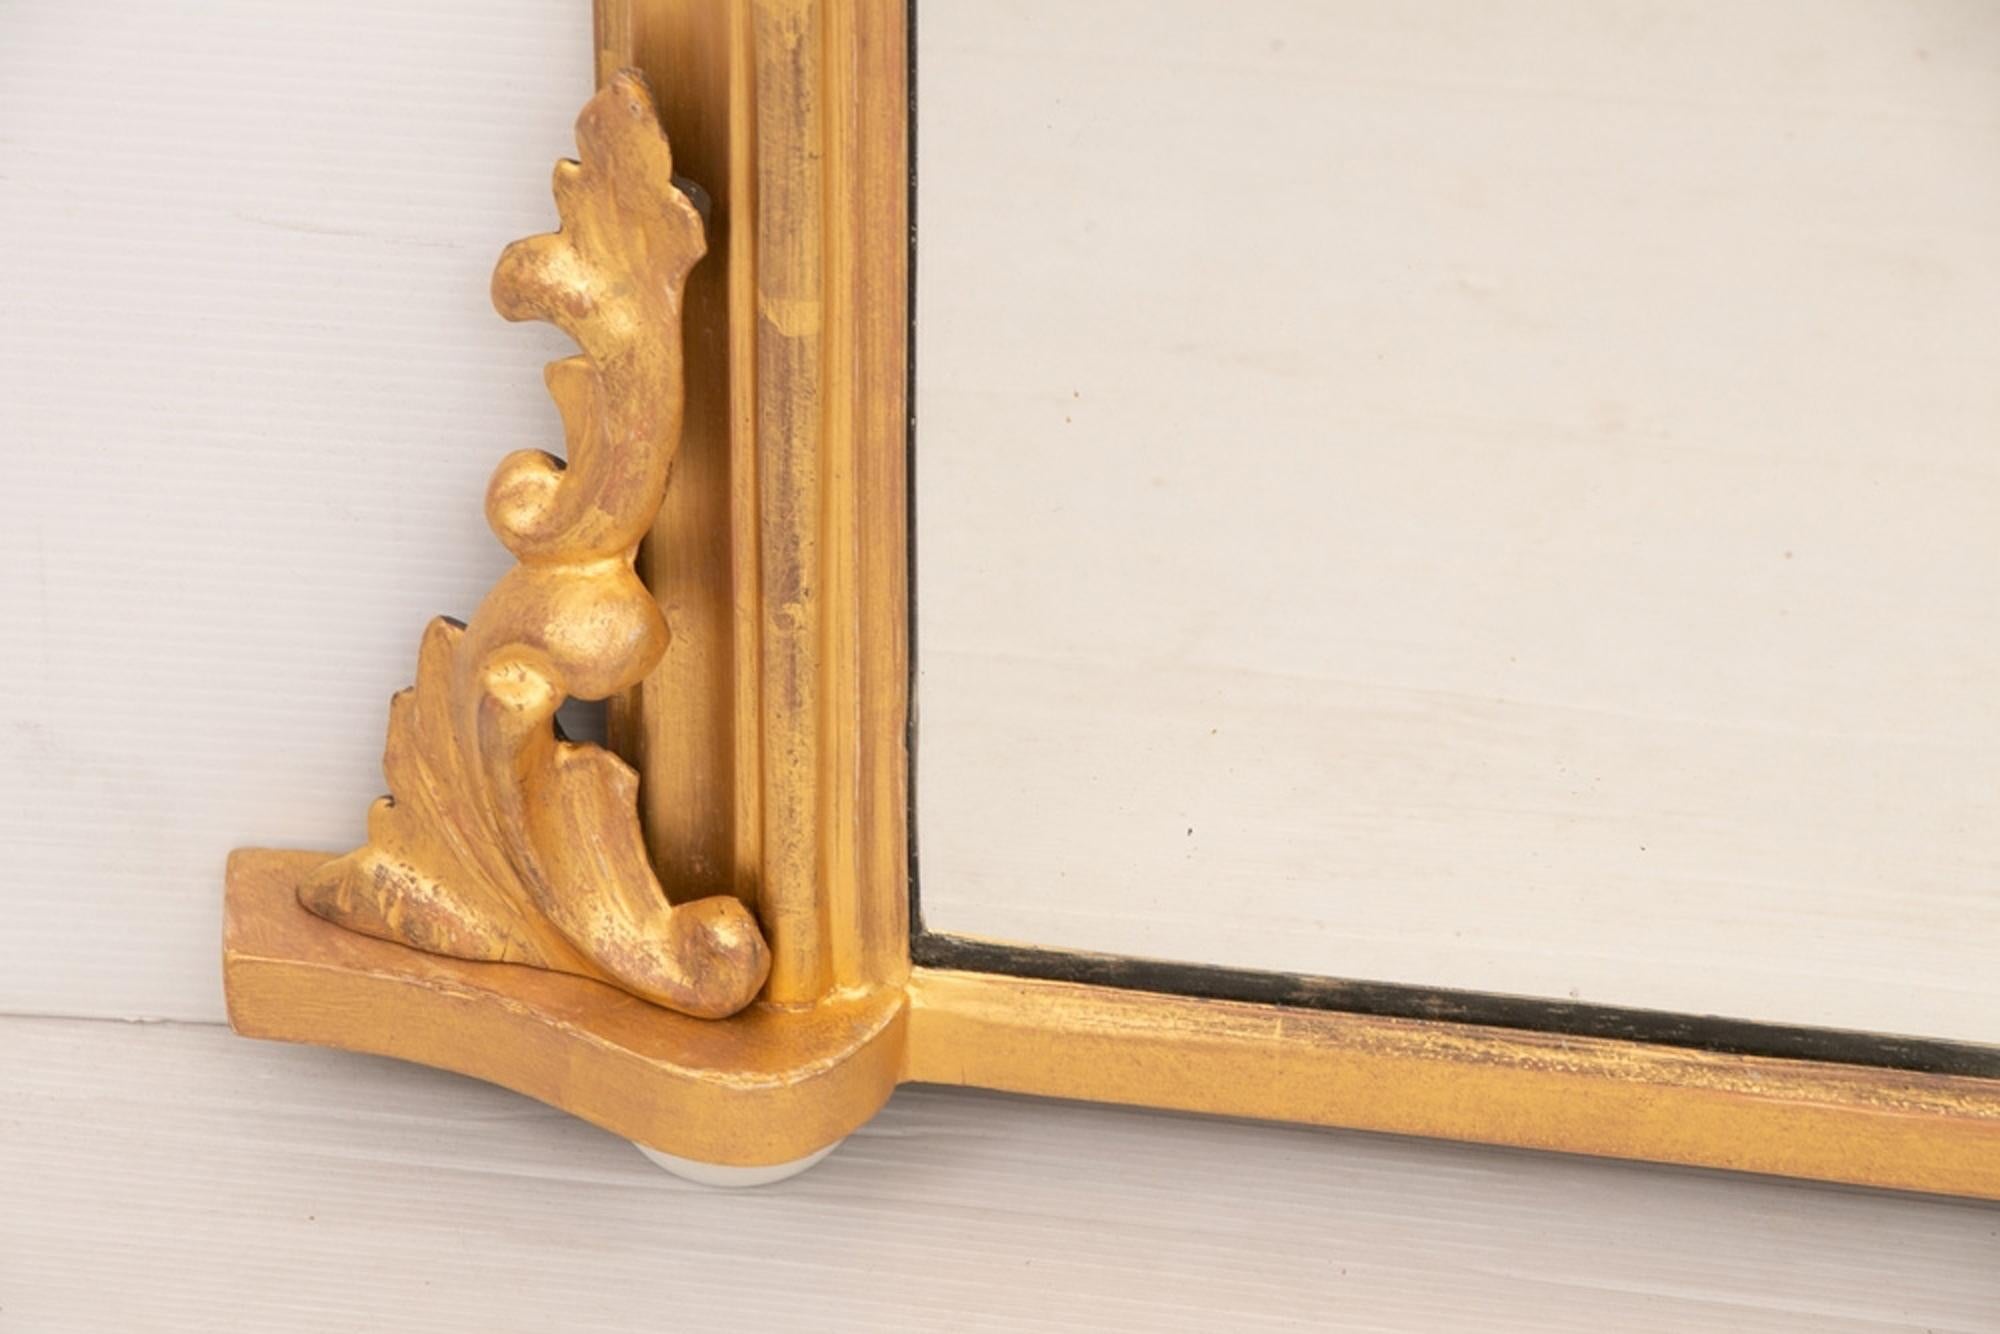 English antique giltwood overmantle mirror, circa 1890. Sizes: 126.5 high, 119 max width, superb quality 23.5-carat genuine gold leaf water gilding. Original mirror plate with overall foxing, original backing boards. A Victorian mirror fully